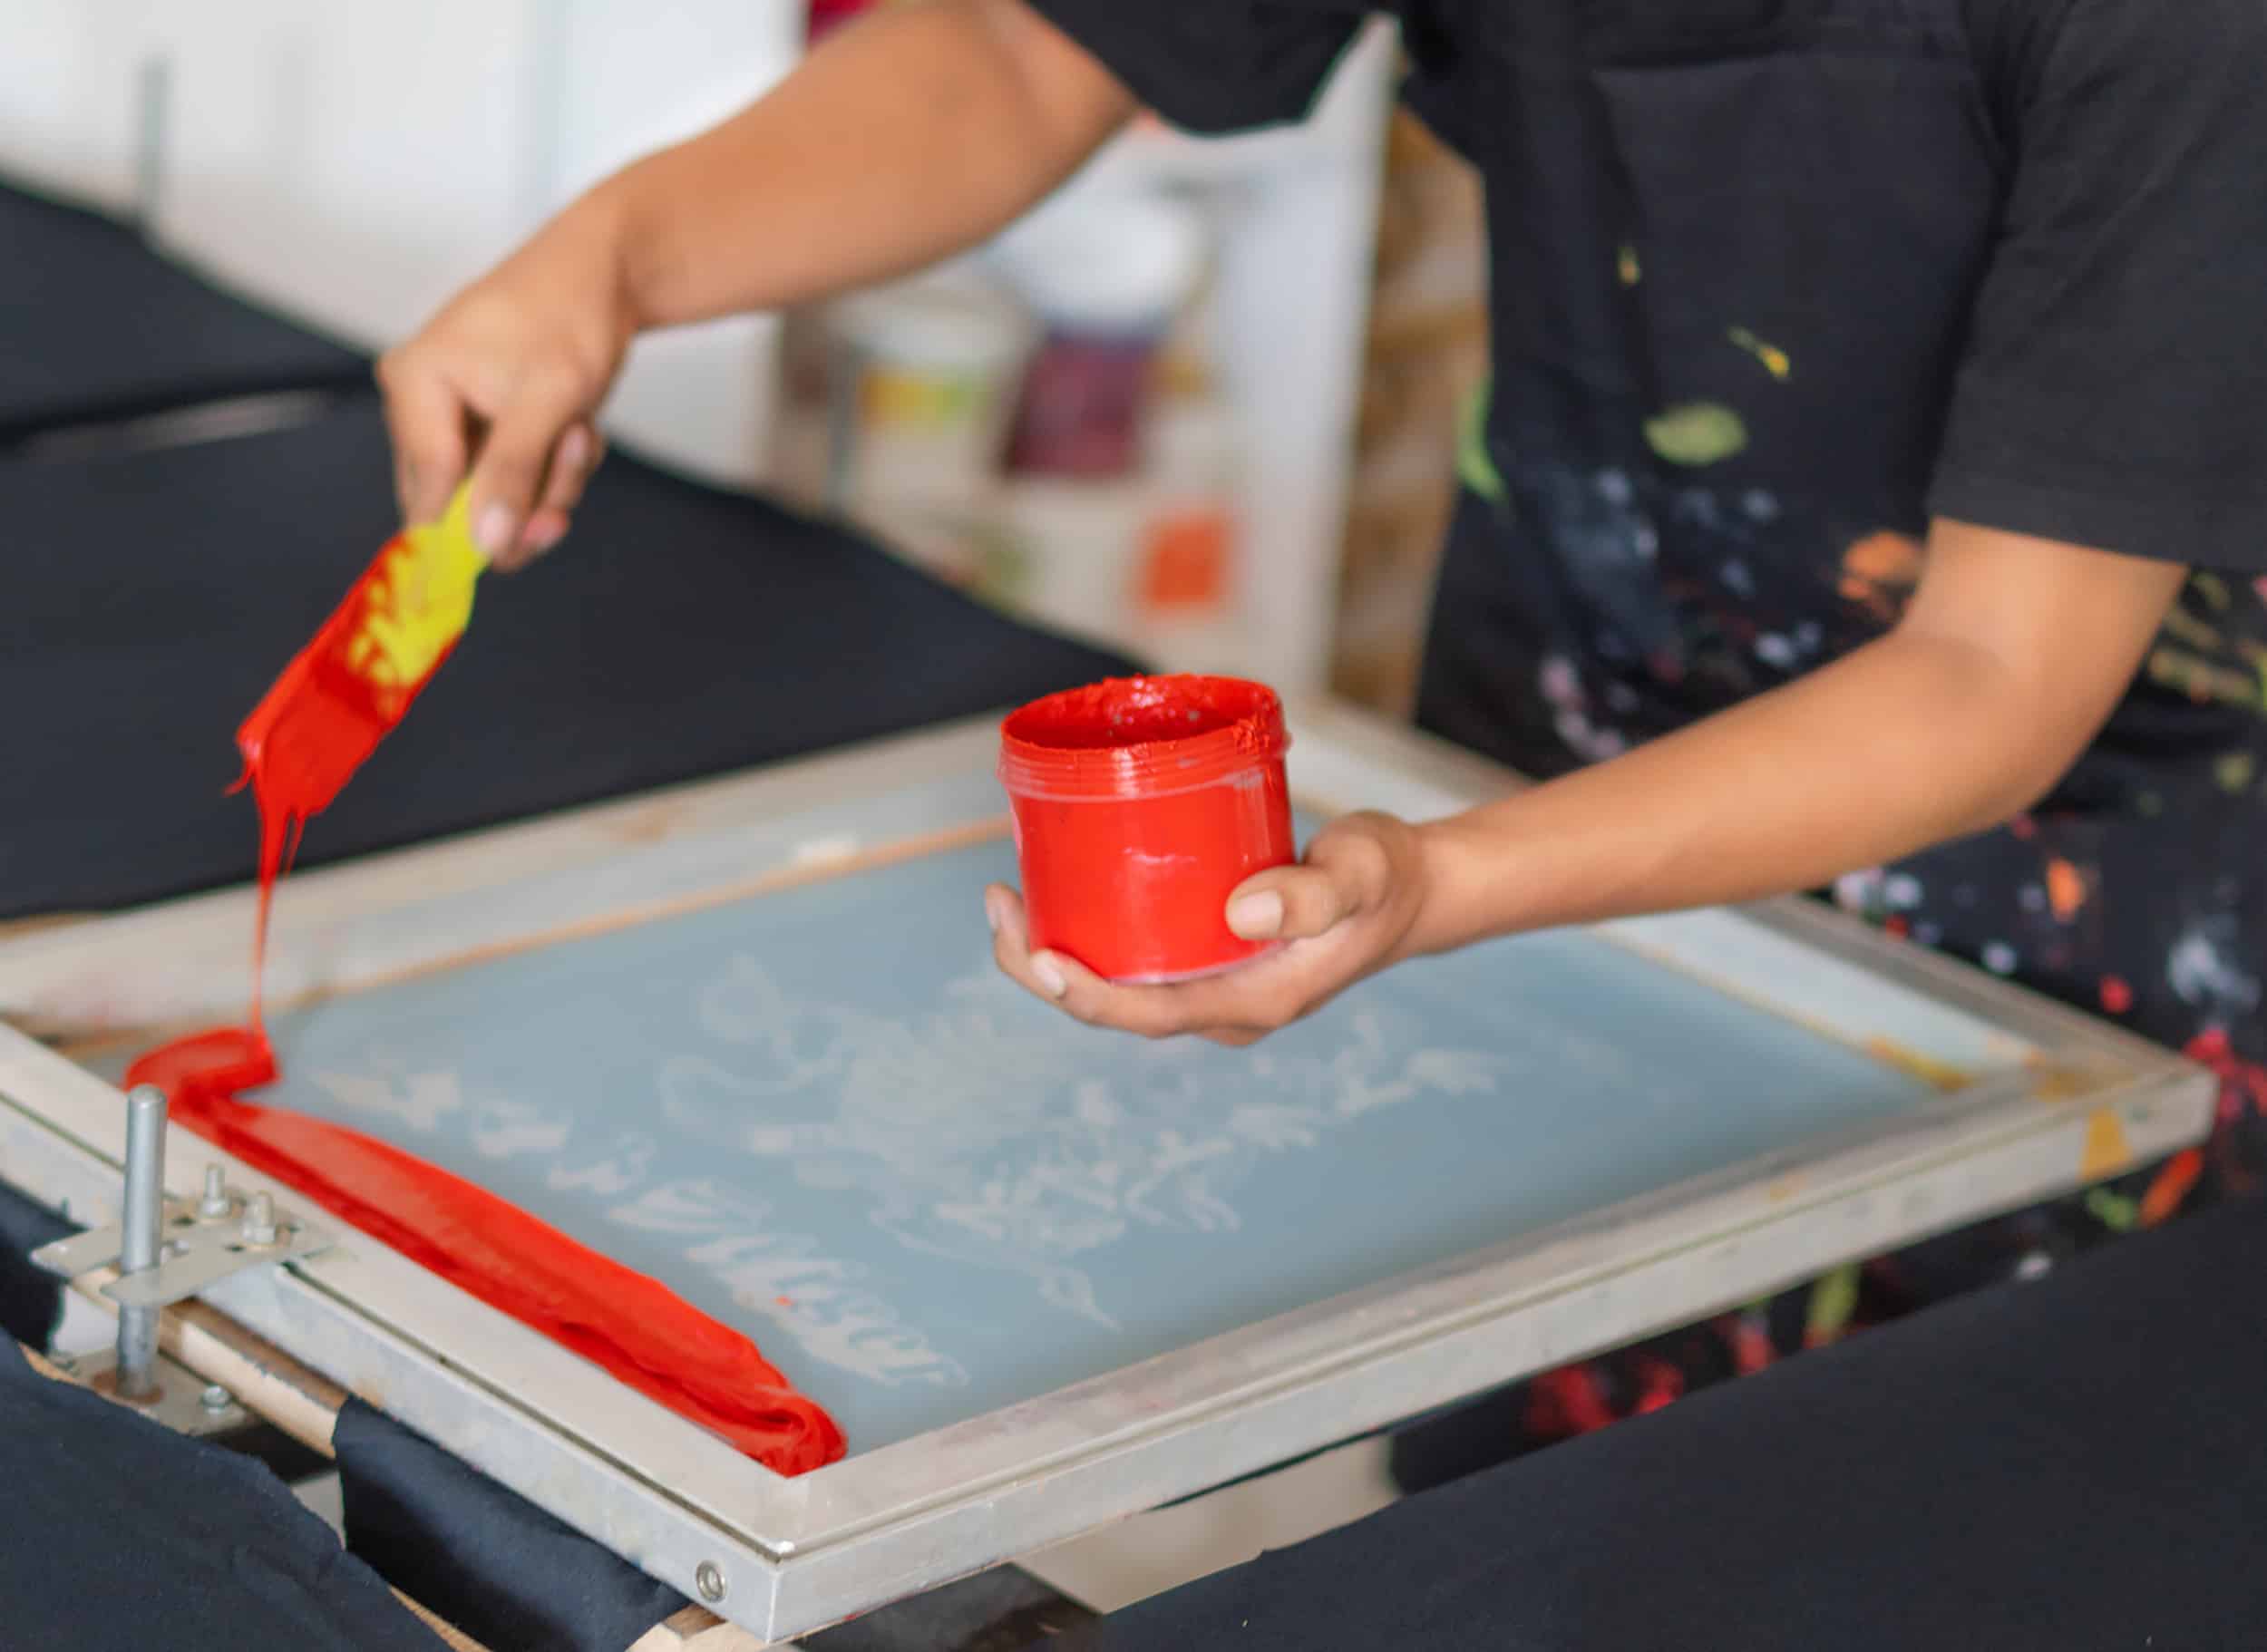 14 Special Effects You Can Use to Enhance Your Screen Prints